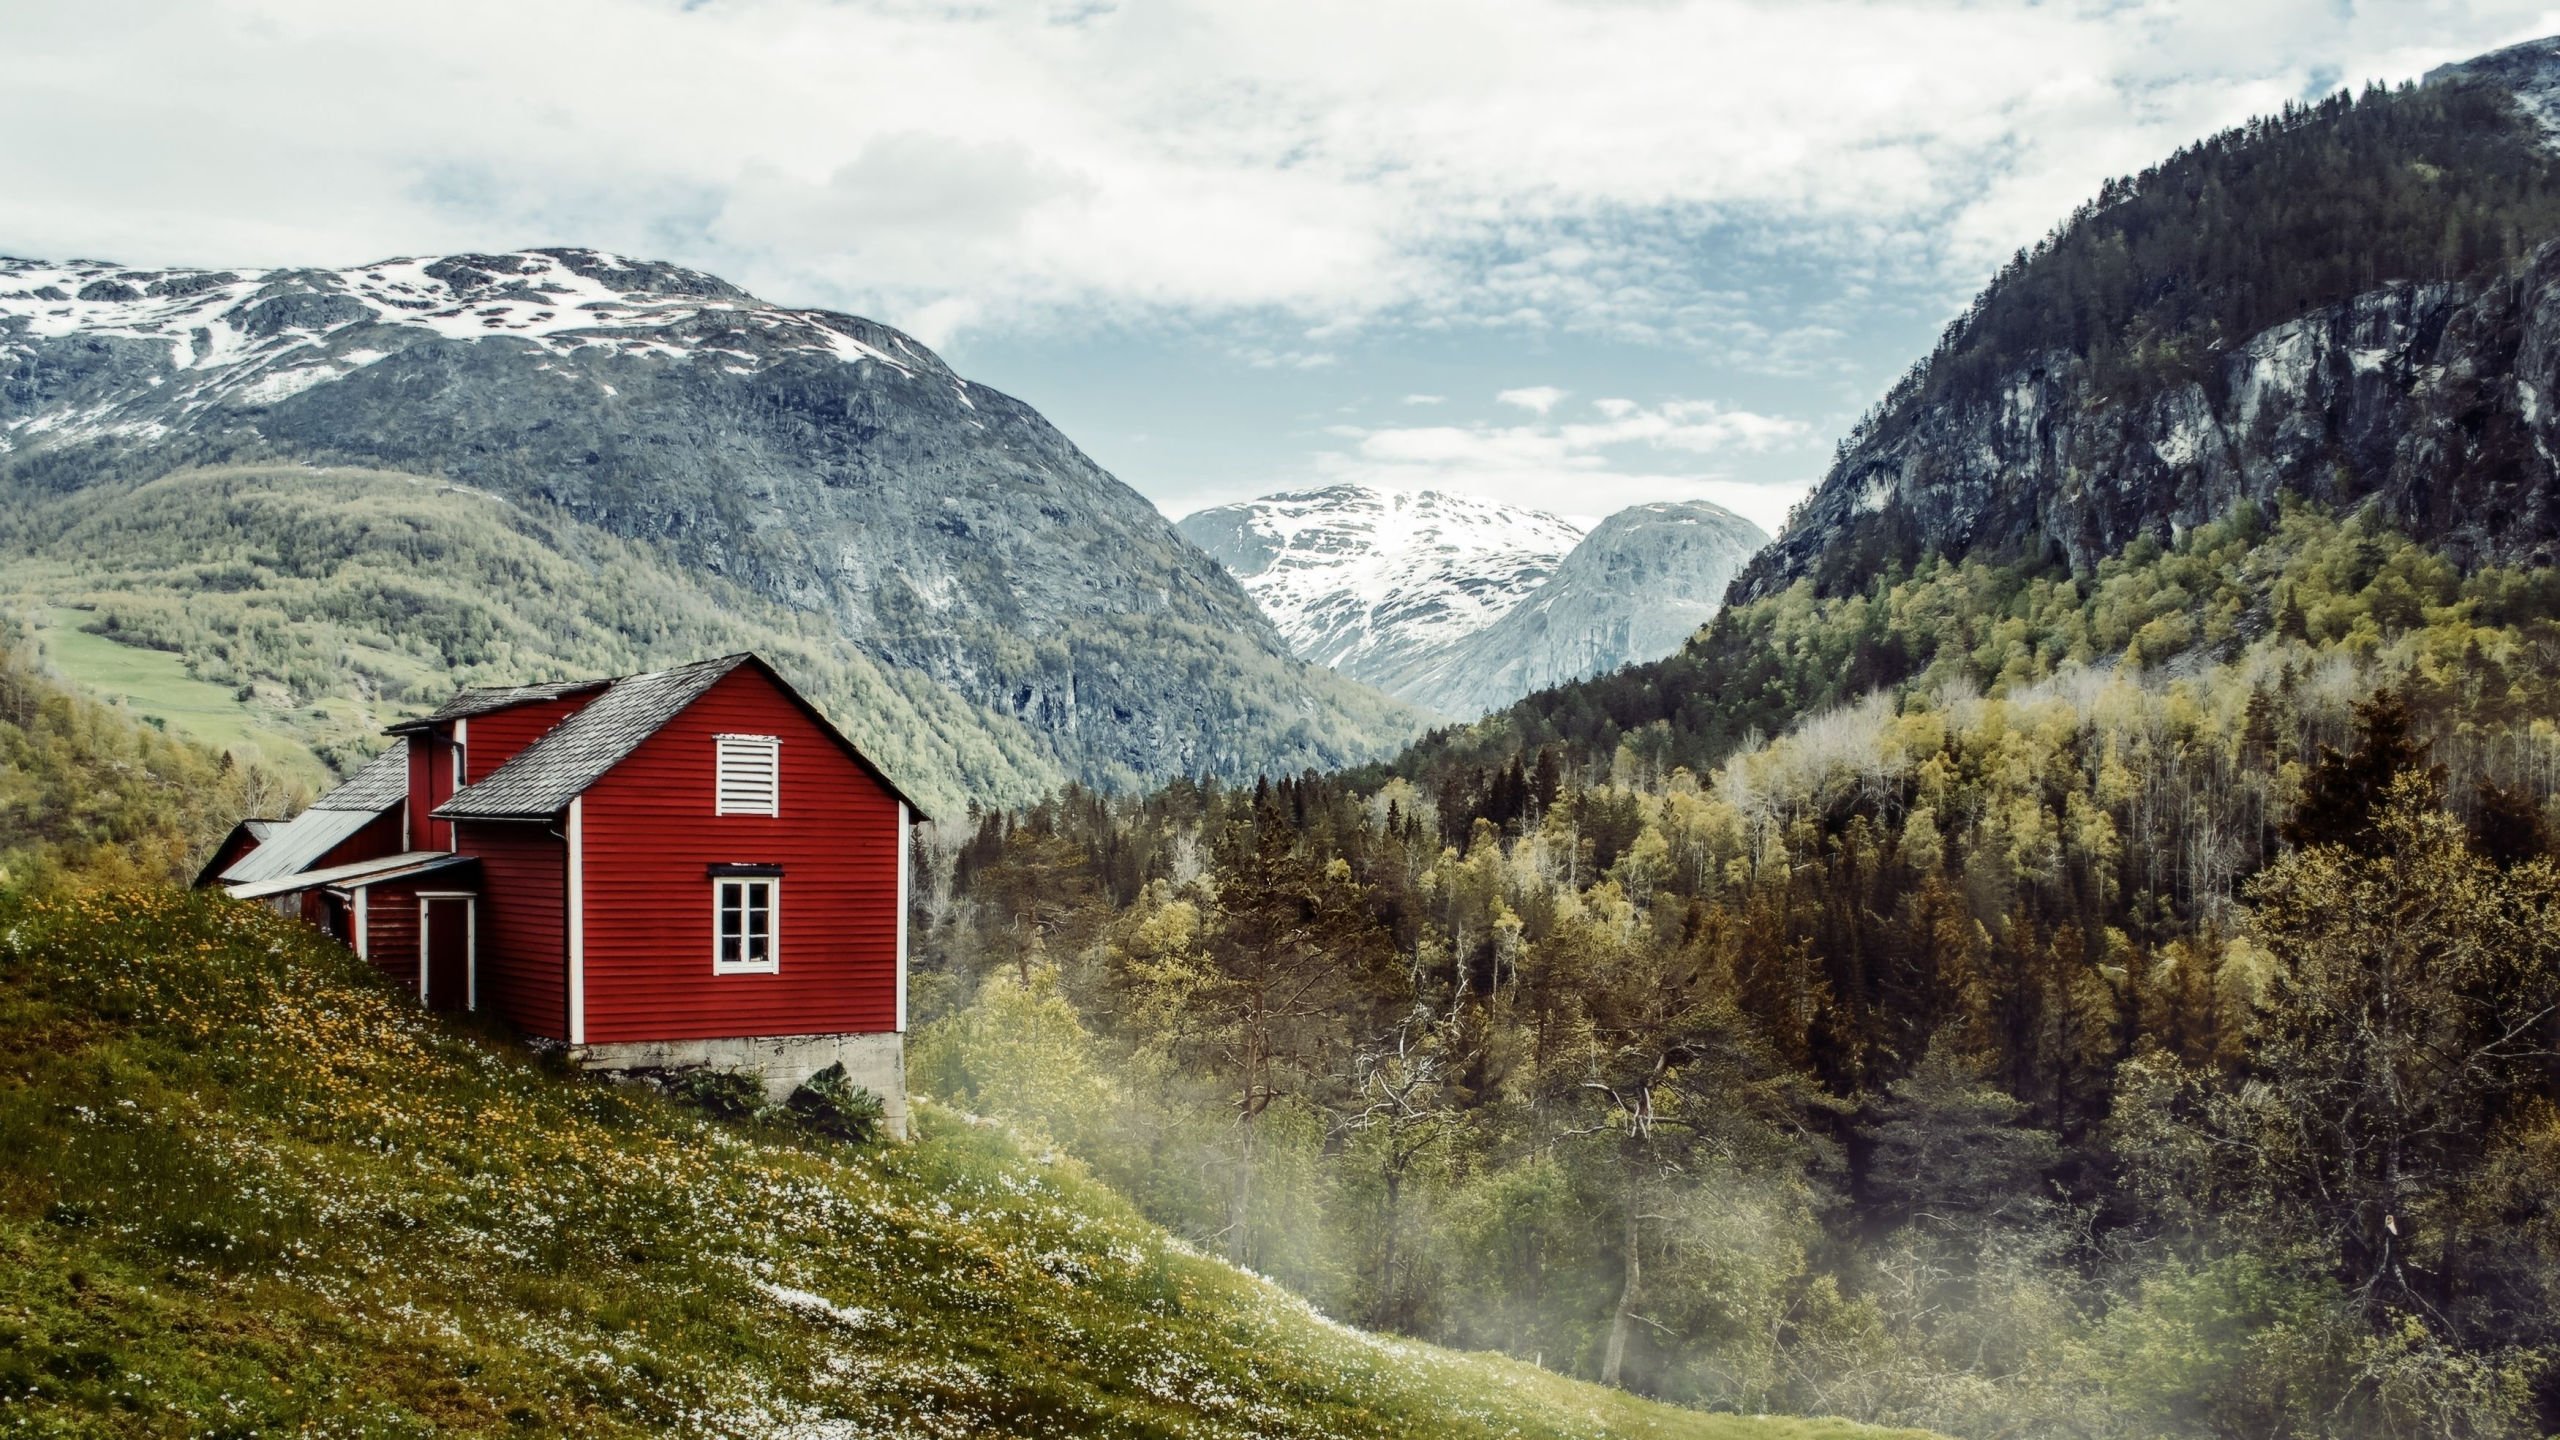 A traditional red, wooden house in rural Norway.